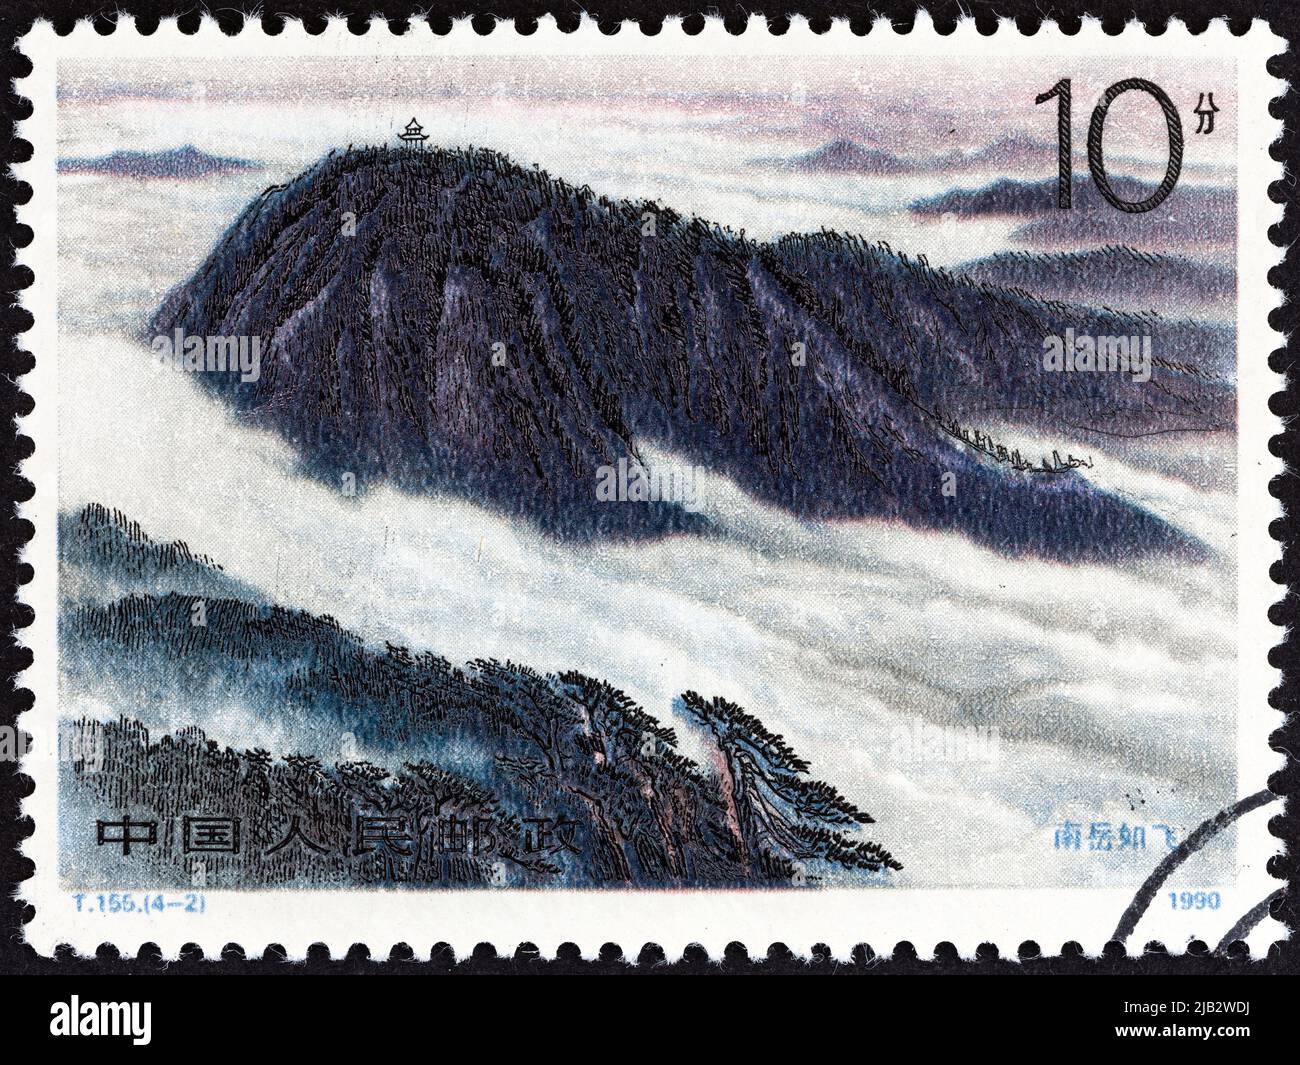 CHINA - CIRCA 1990: A stamp printed in China from the 'Mount Hengshan, Hunan Province' issue shows Flying Nanyue Mountain, circa 1990. Stock Photo